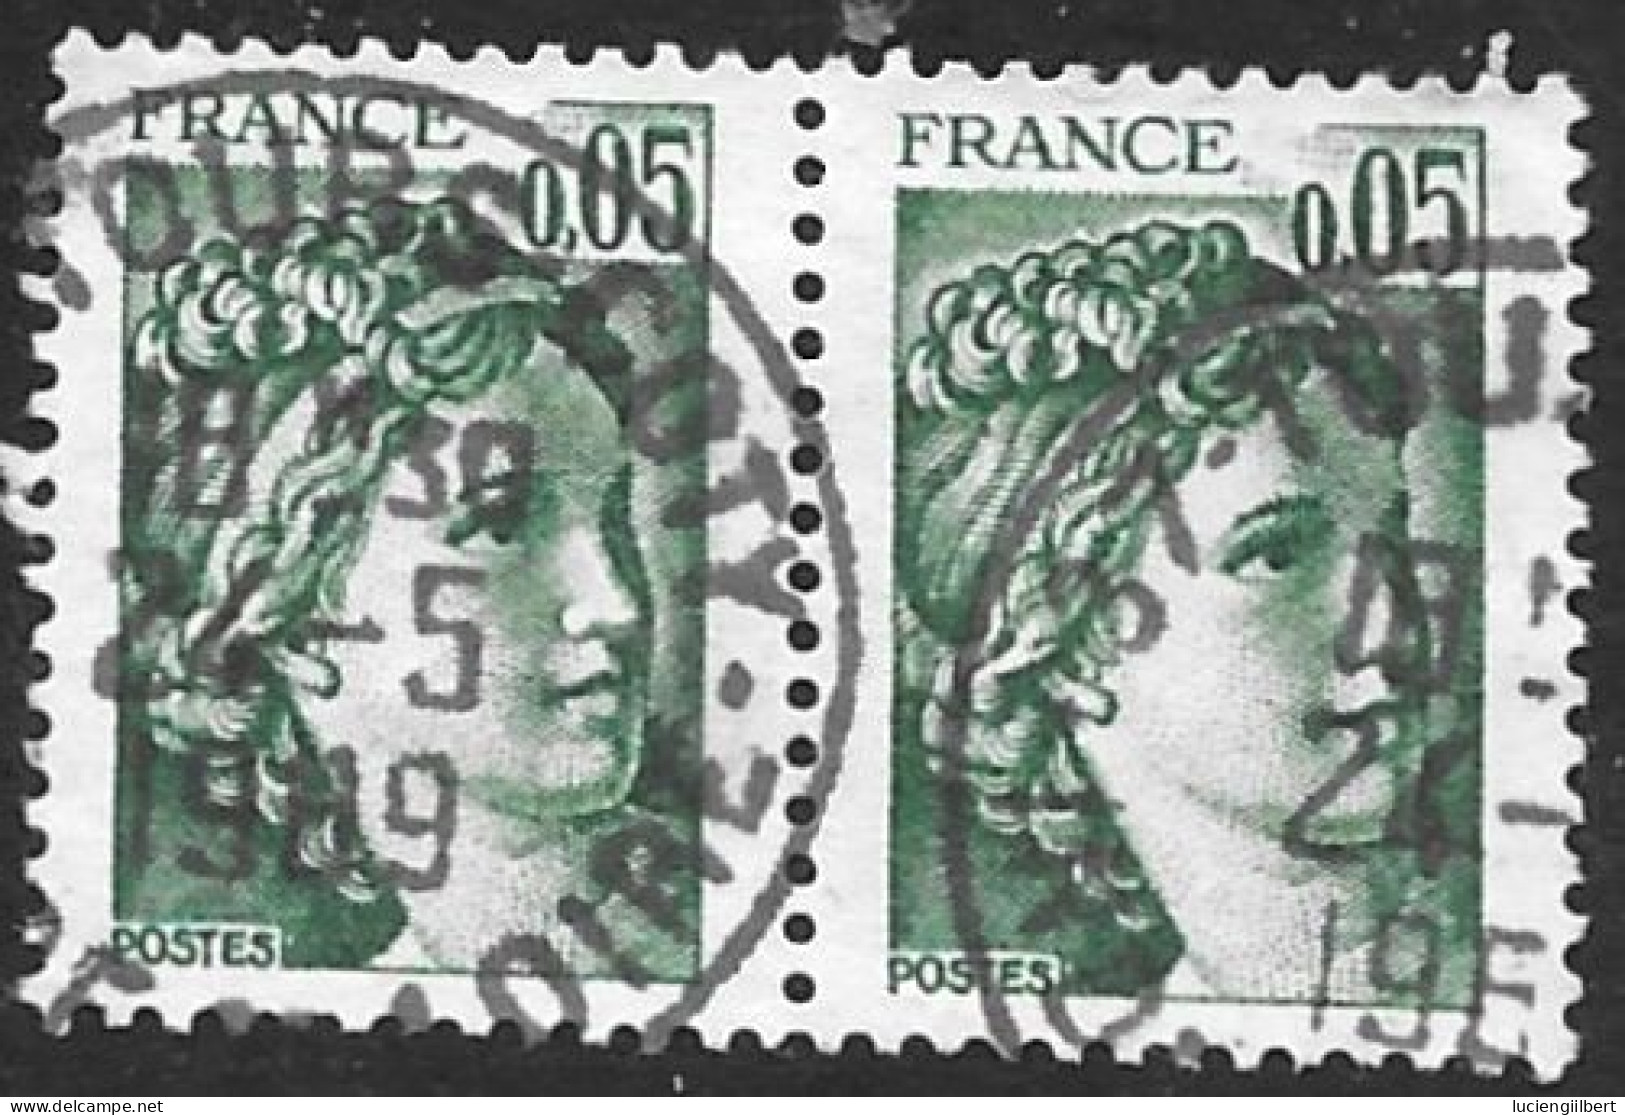 TIMBRE N° 1962   -  SABINE DE GANDON   -  PAIRE  -  OBLITERE  - 1977 / 1978 - Used Stamps